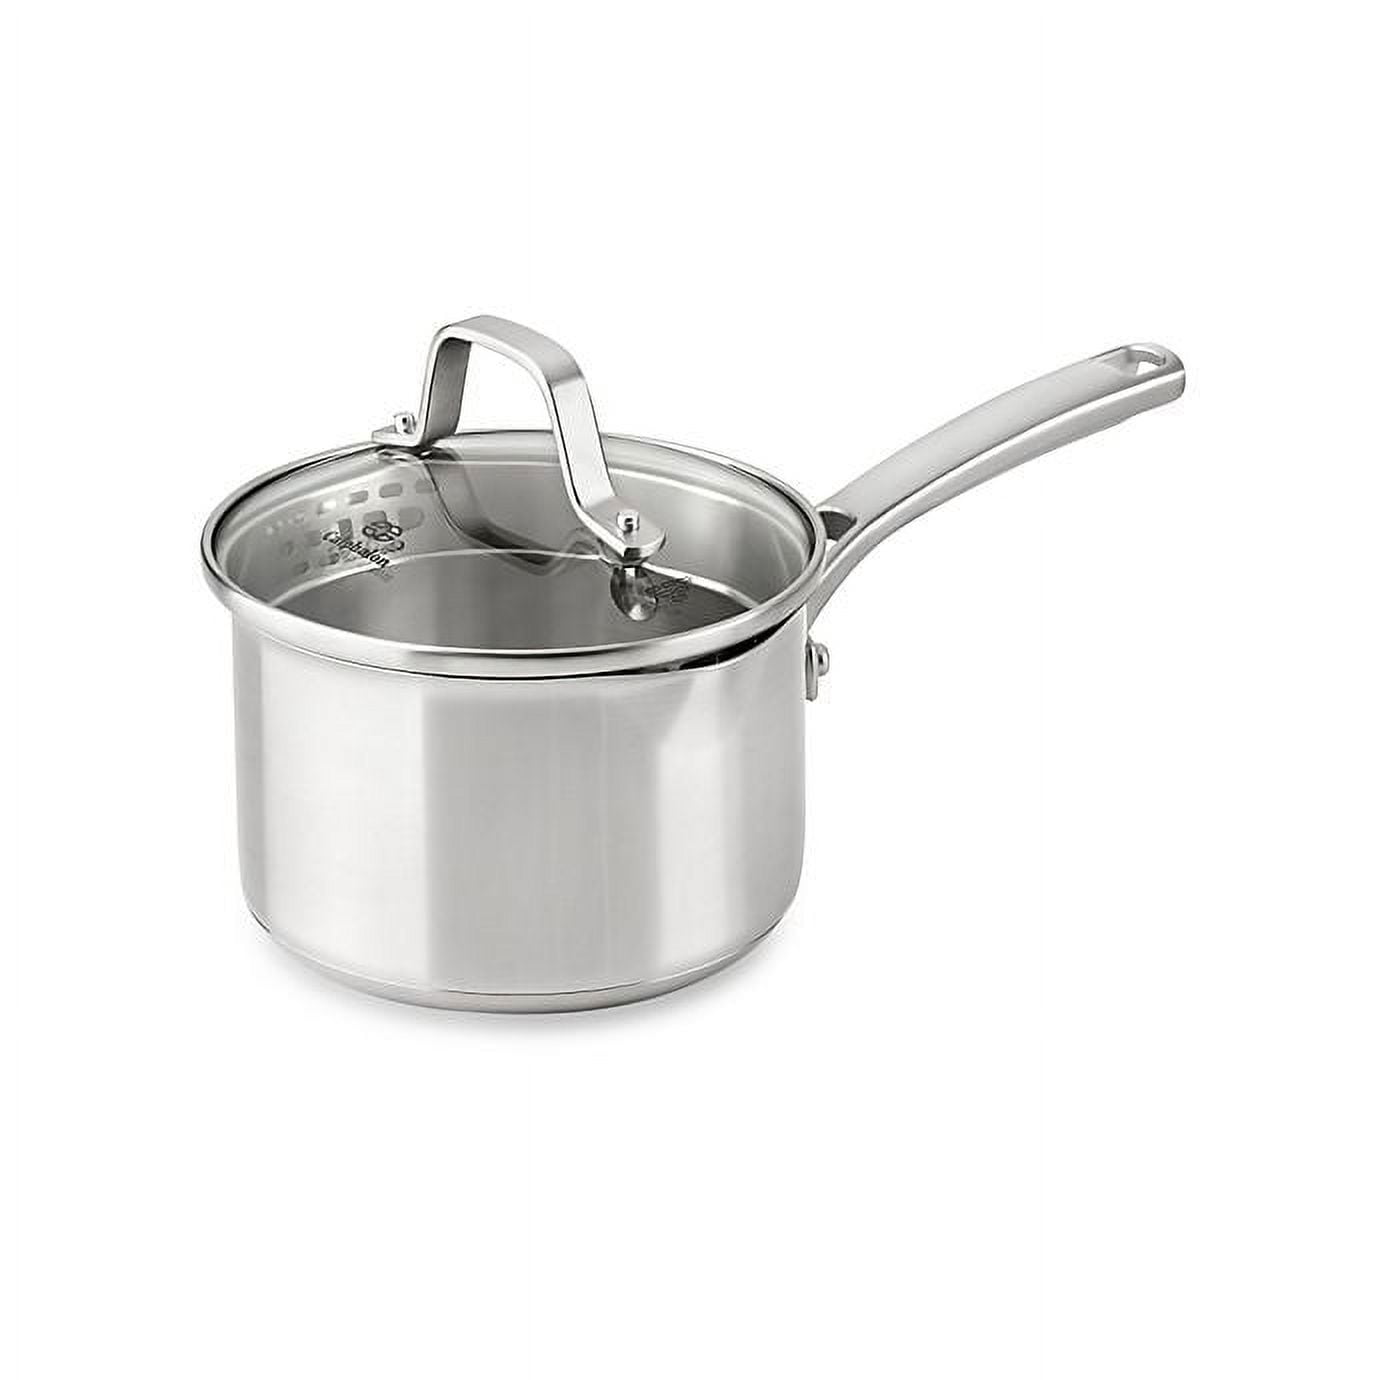 Calphalon Classic Stainless Steel 1.5 qt. Covered Saucepan 